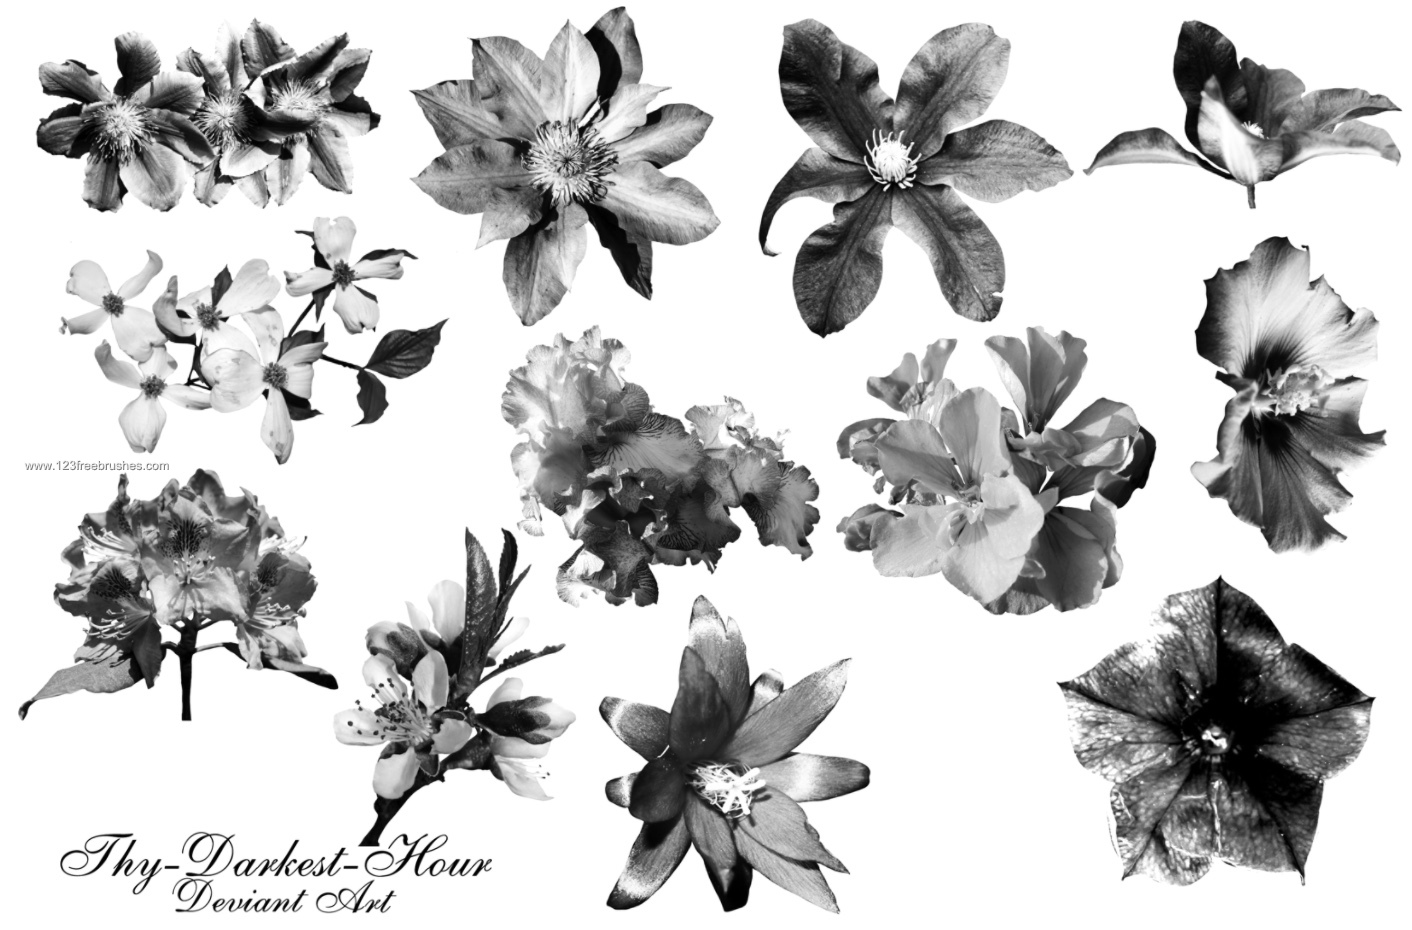 Flower Brushes Photoshop 7 Free Download